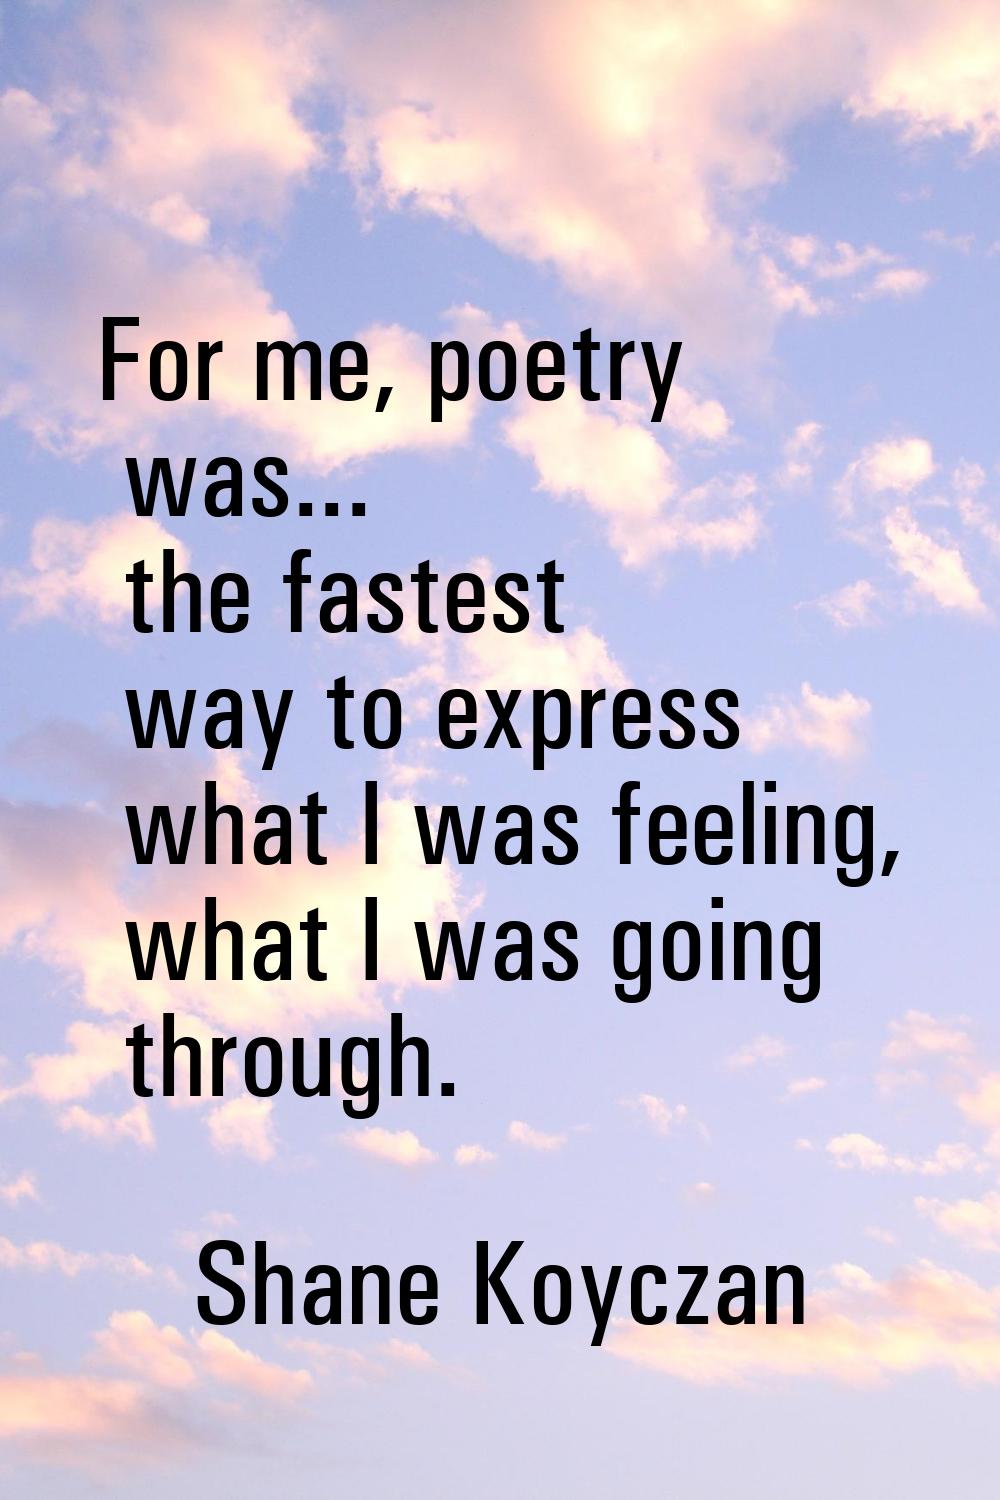 For me, poetry was... the fastest way to express what I was feeling, what I was going through.